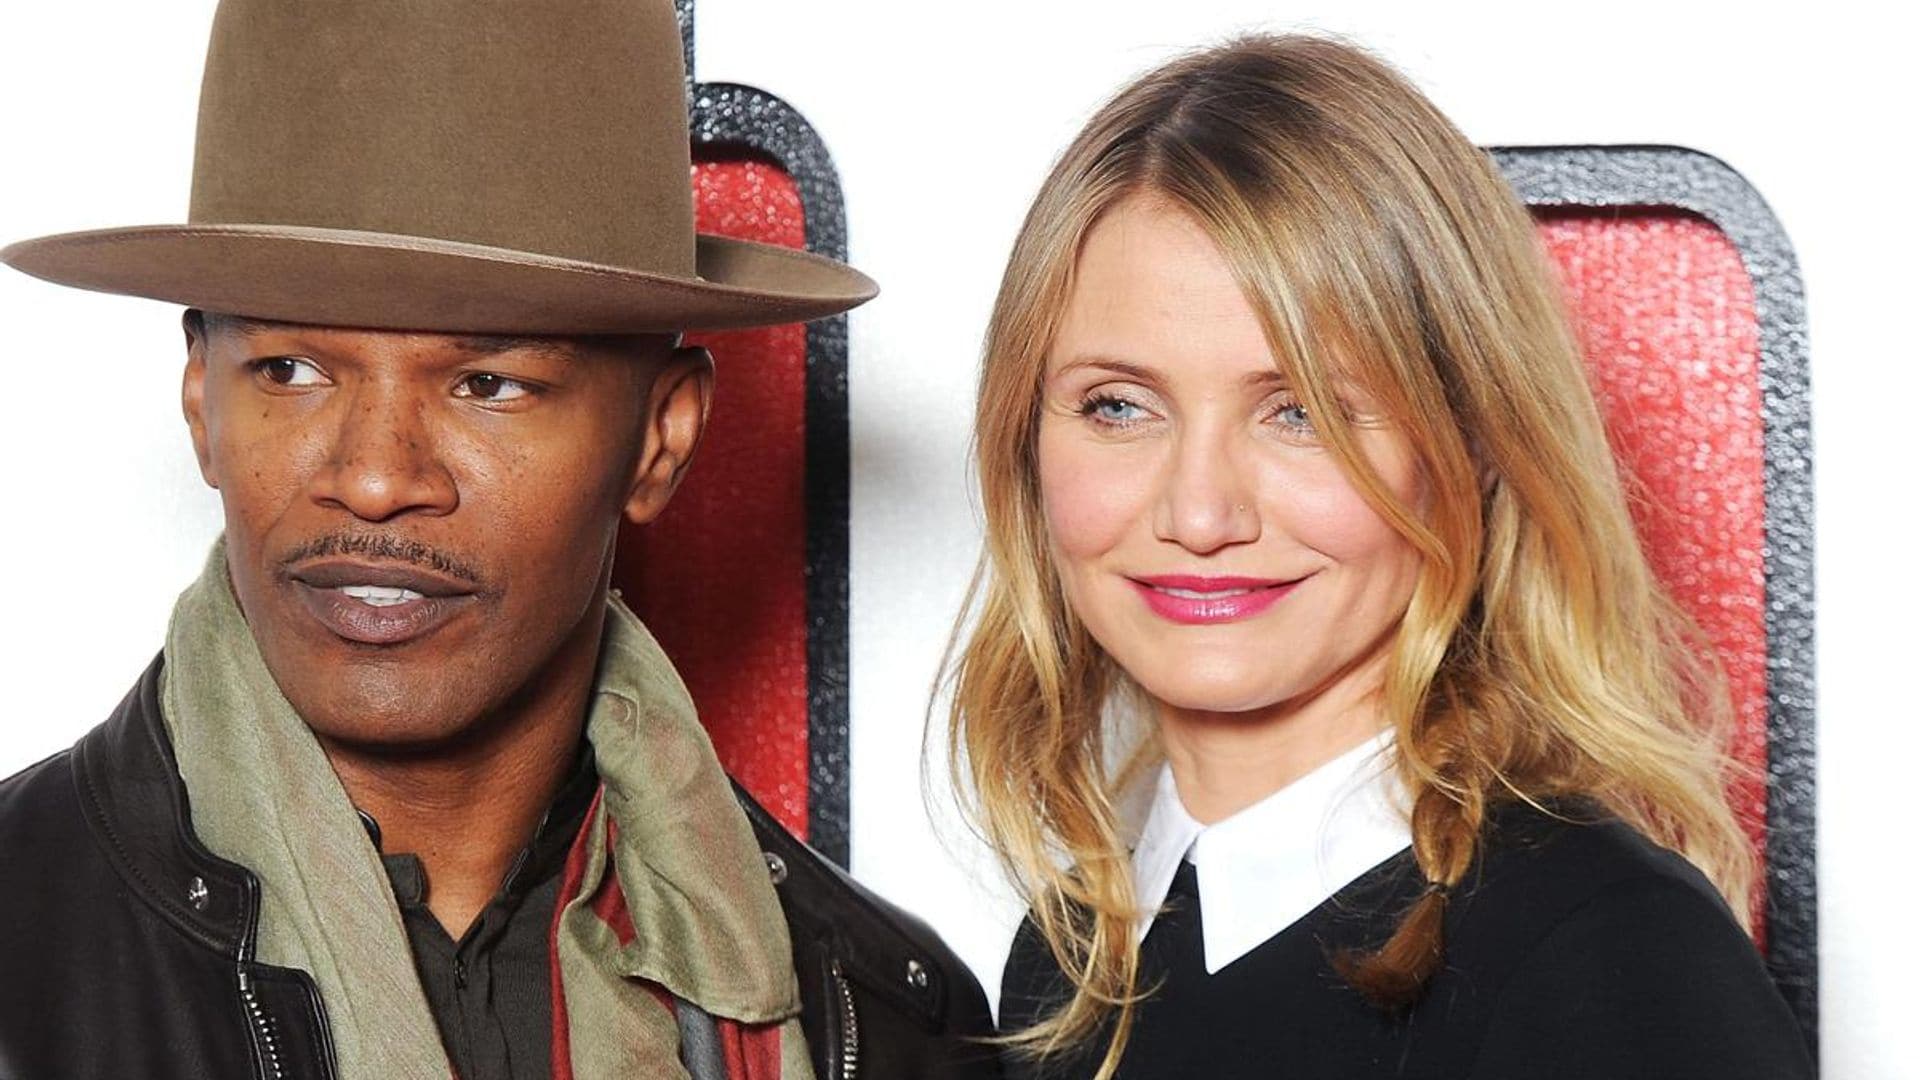 Cameron Diaz is deeply concerned about her co-star Jamie Foxx’s recent health crisis